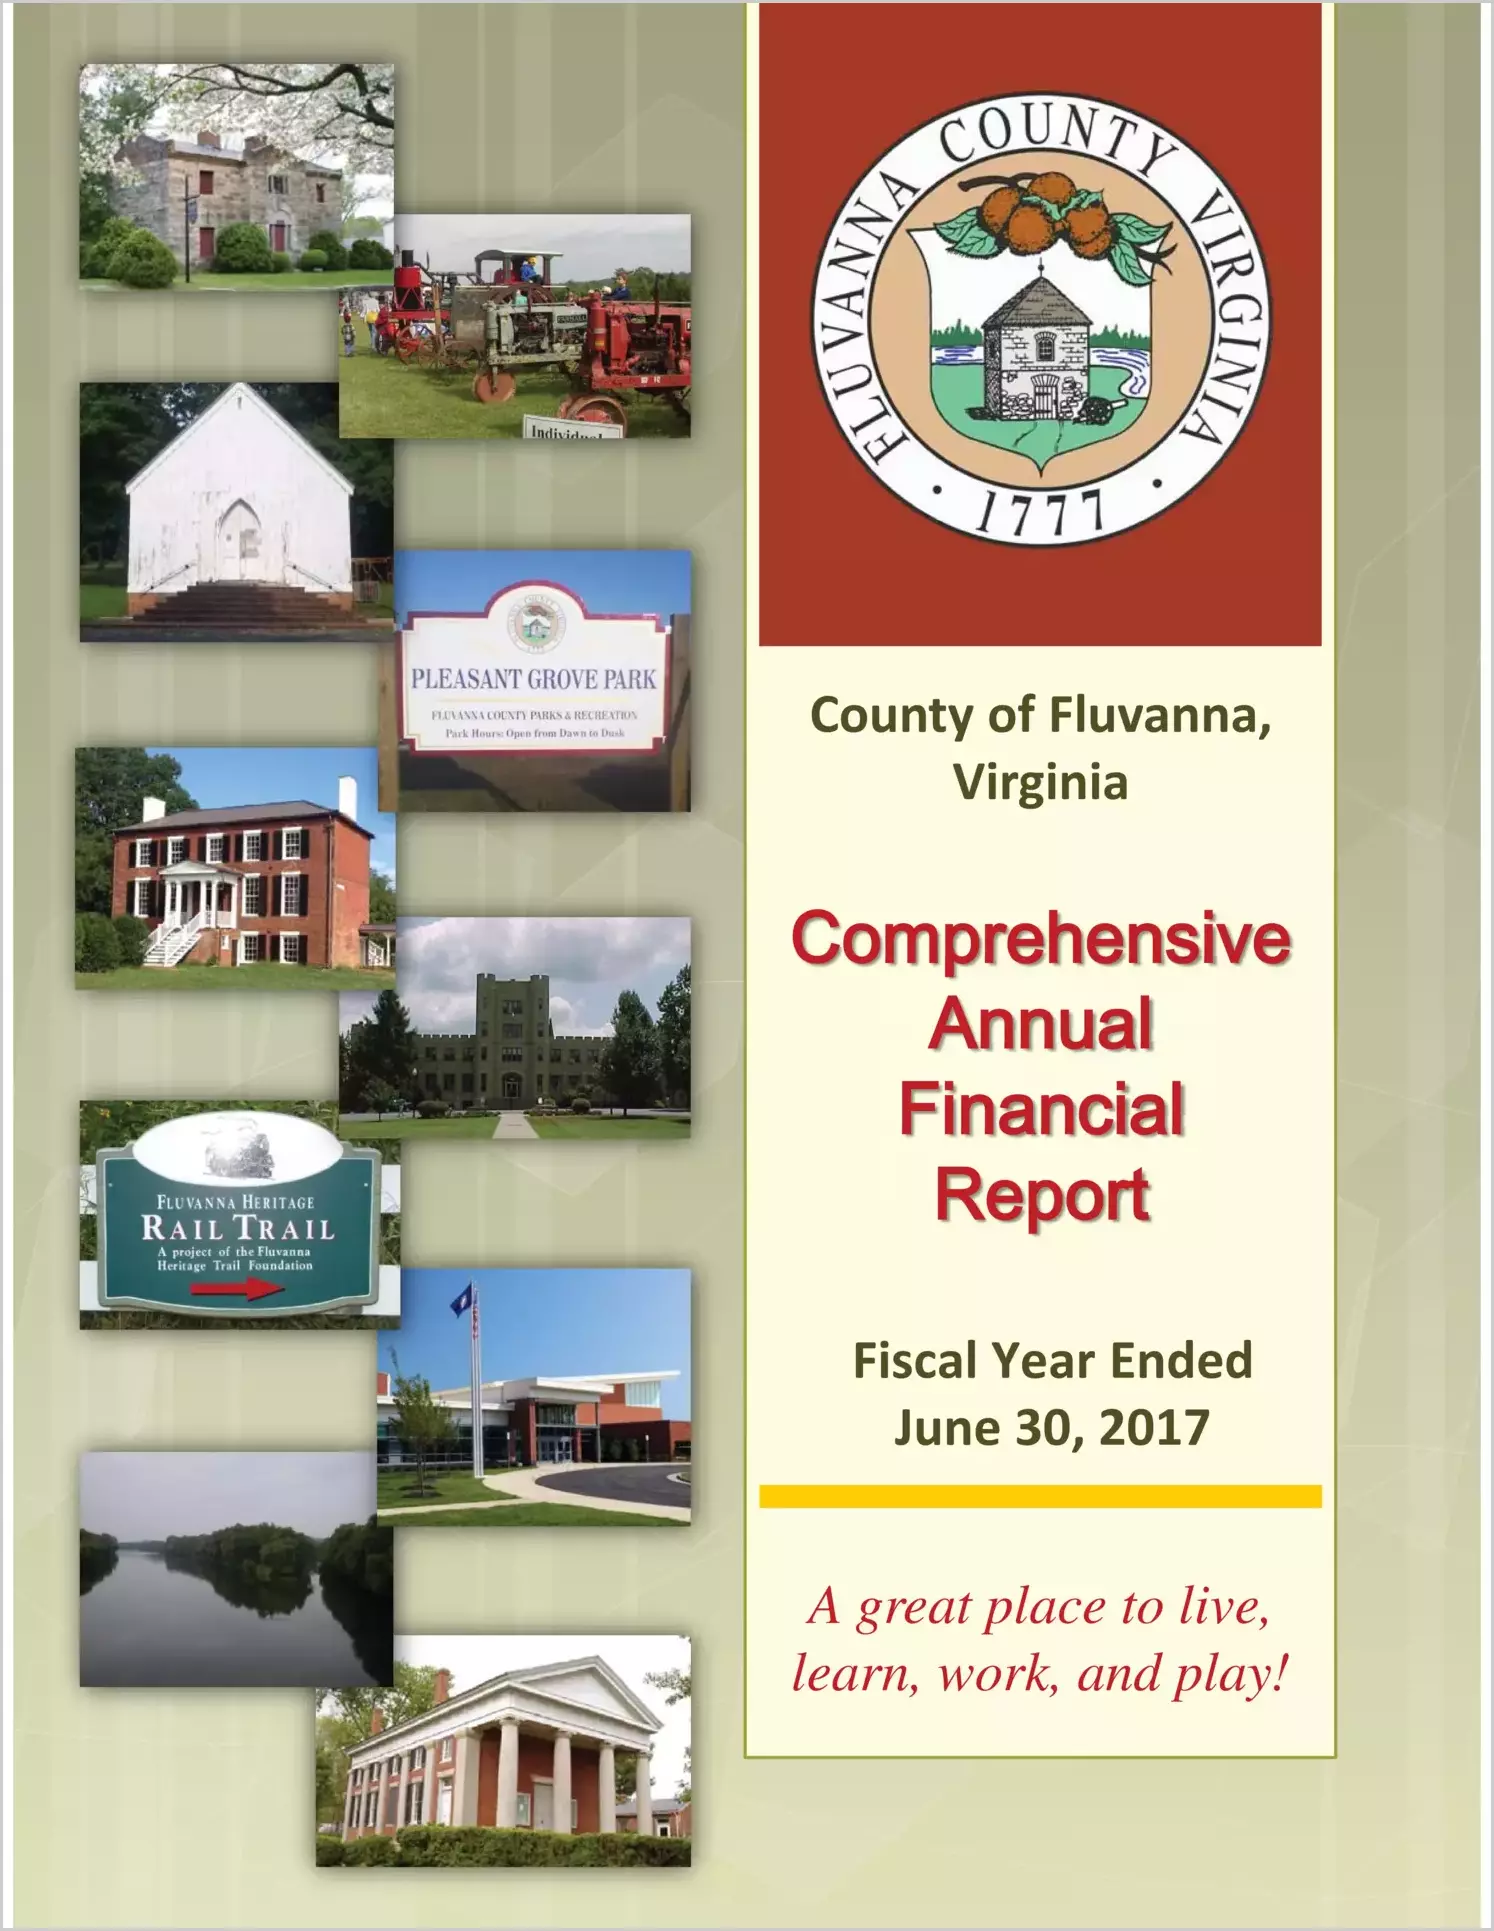 2017 Annual Financial Report for County of Fluvanna